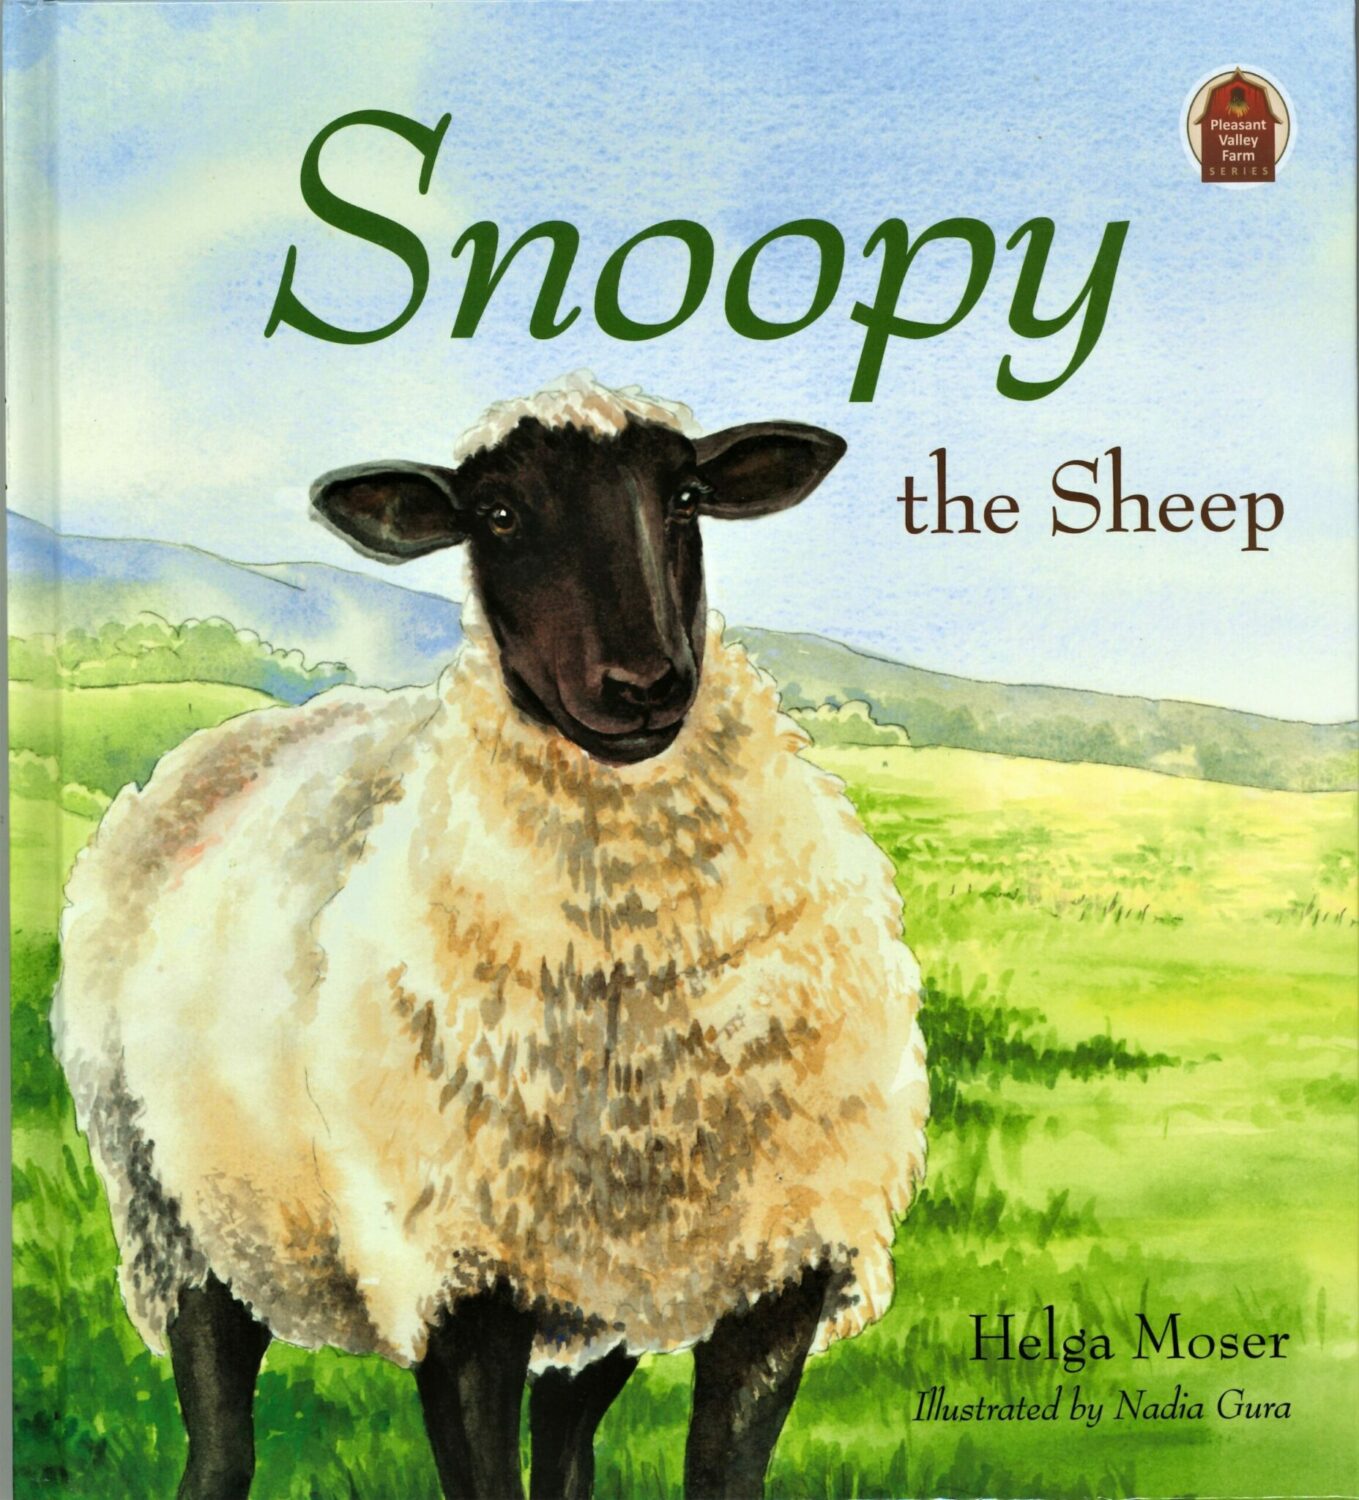 Snoopy the Sheep - Home Messenger